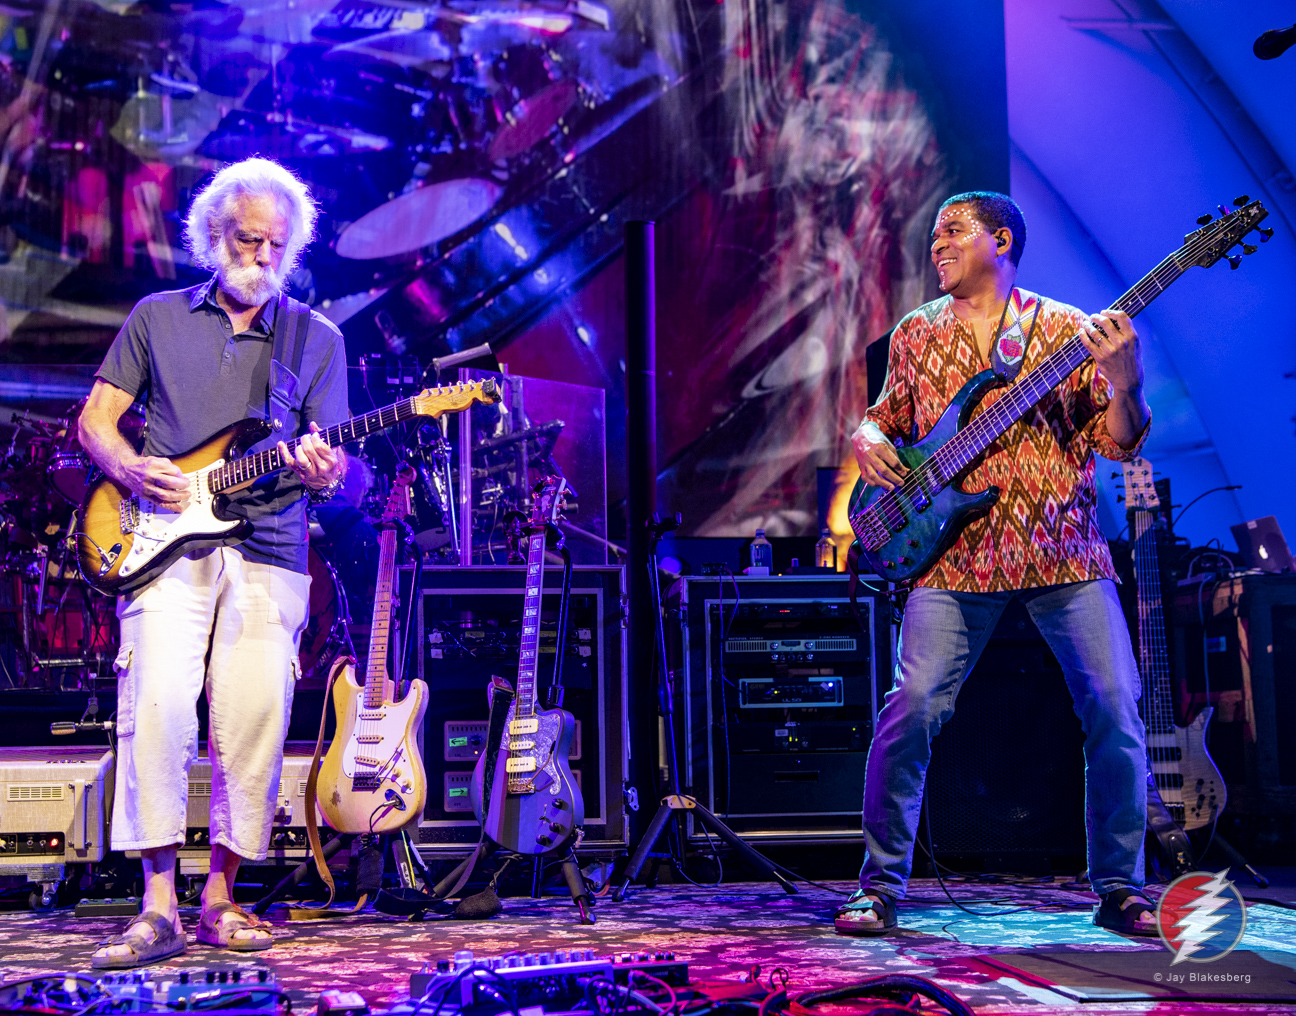 Bob Weir, Oteil Burbridge, Béla Fleck, Sierra Hull and More to Participate in Conversations for Thriving Roots: A Virtual Community Music Conference